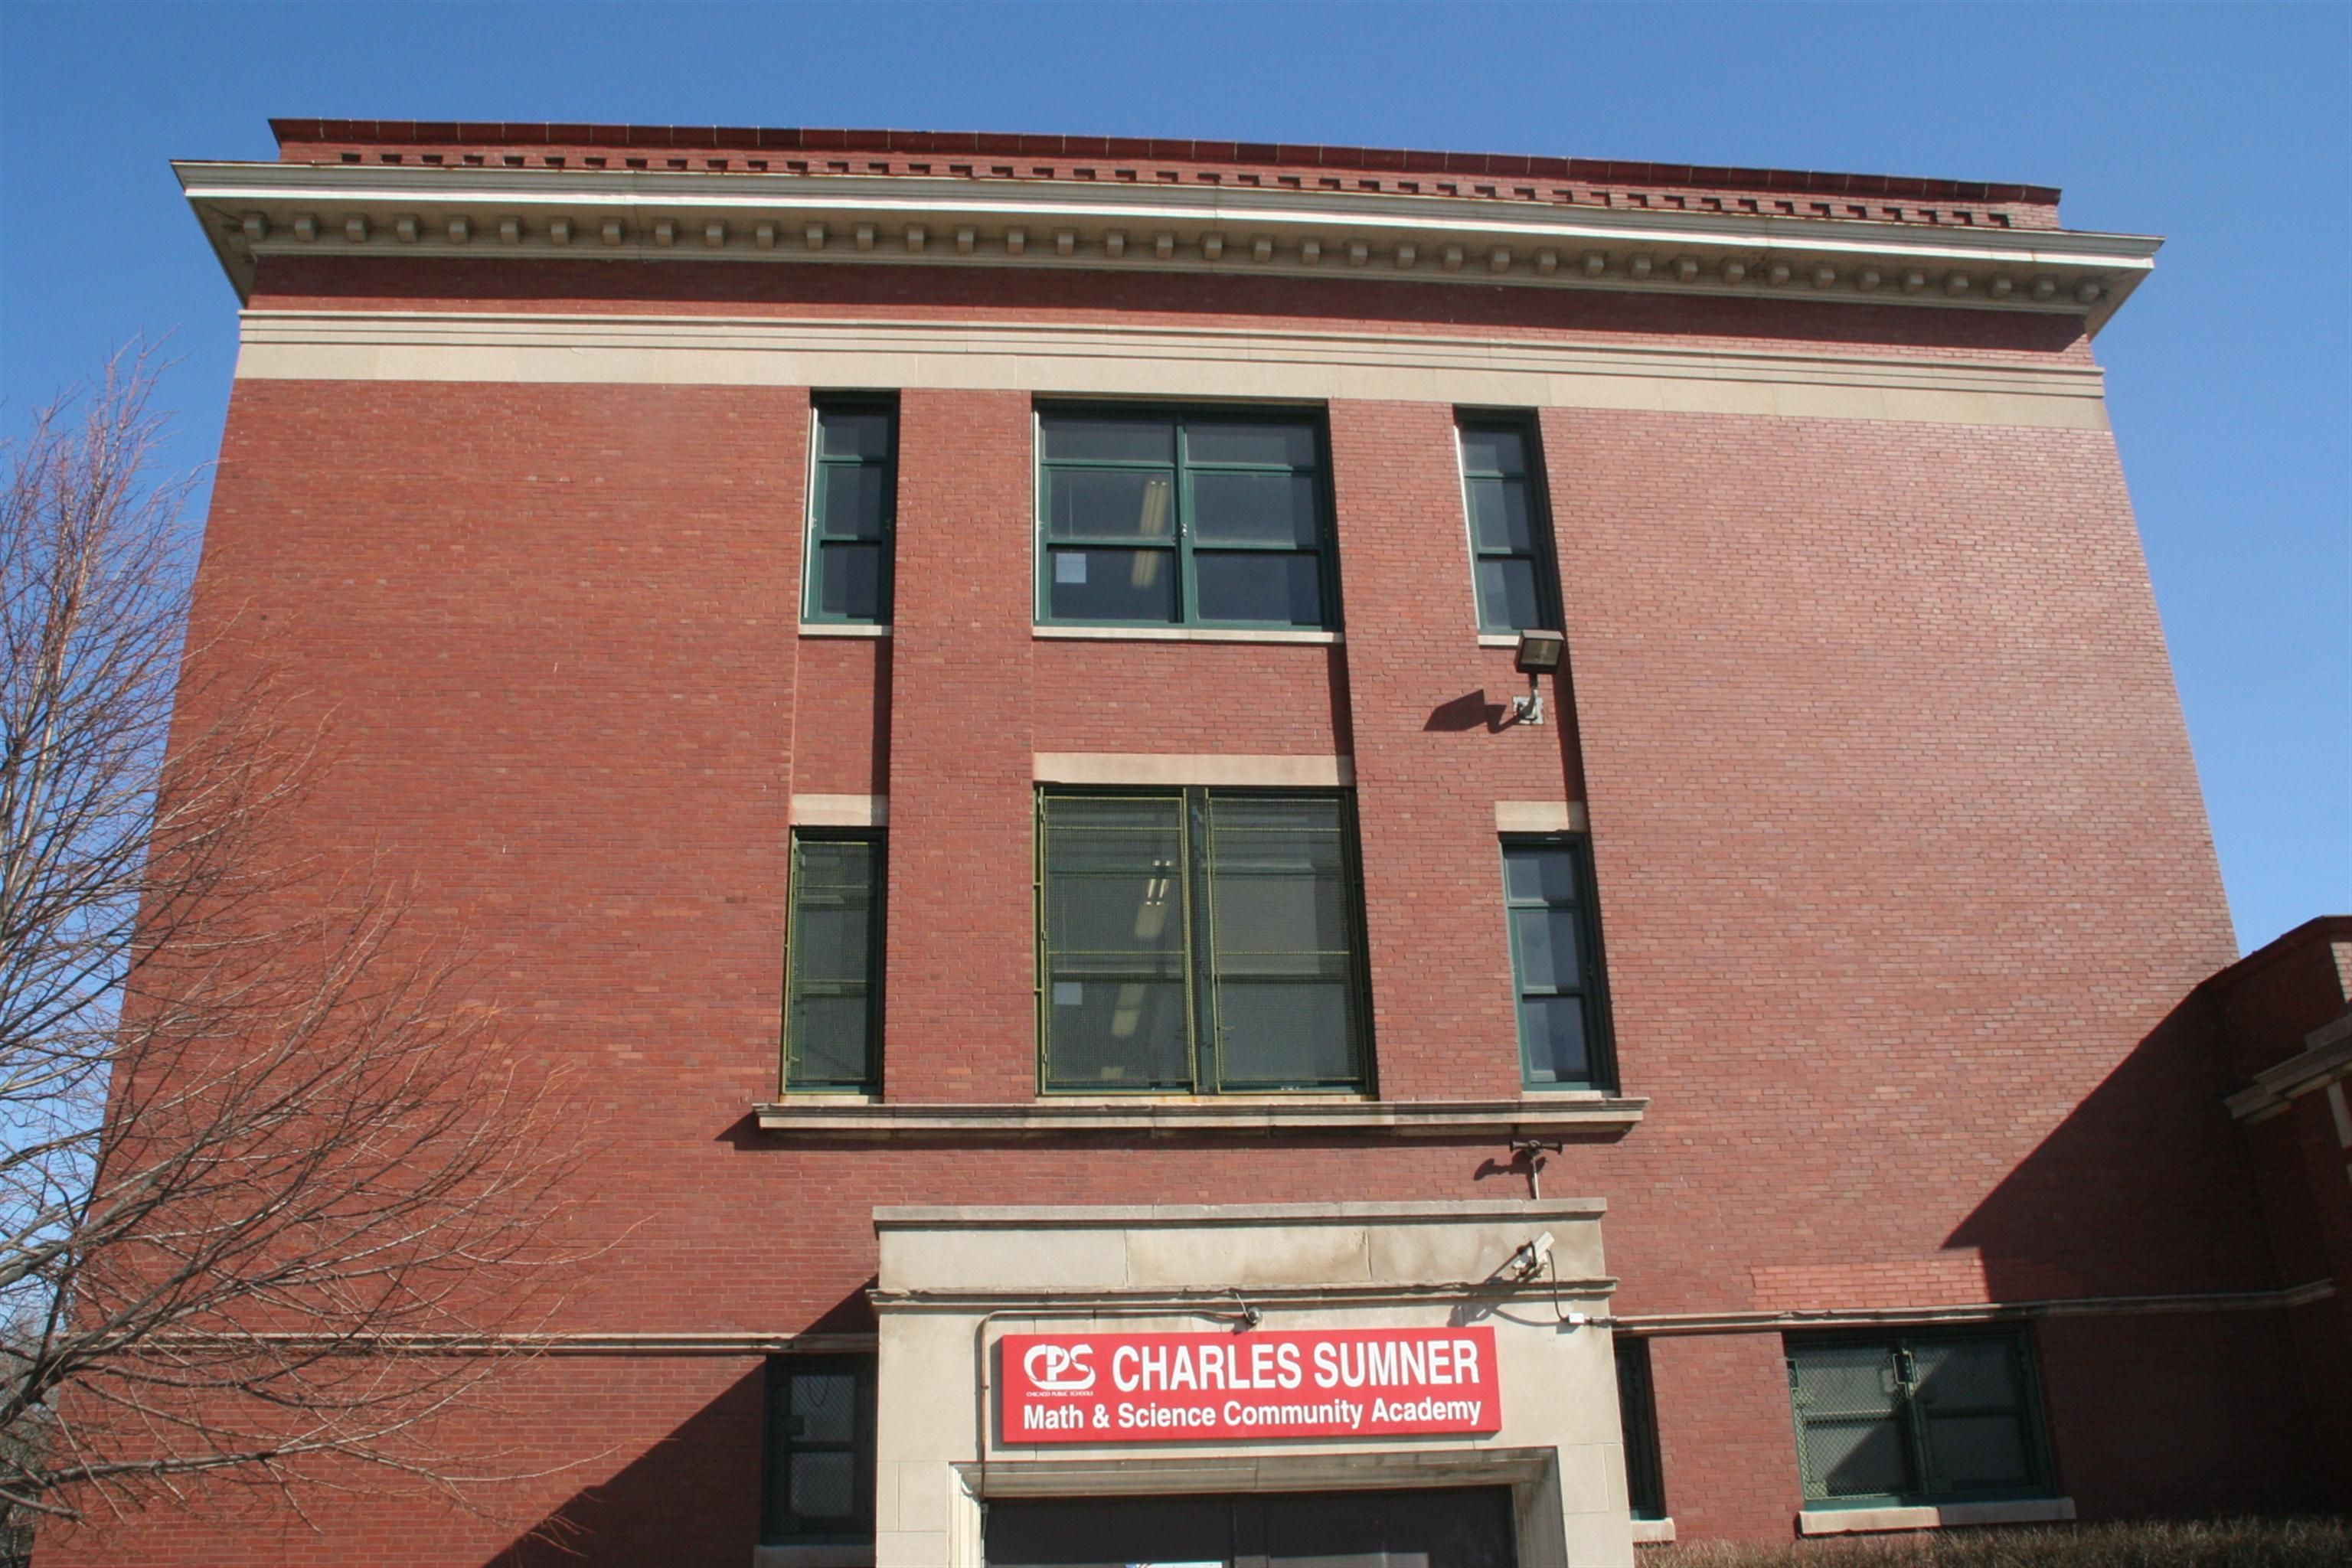 featured image Charles Sumner Math & Science Community Academy